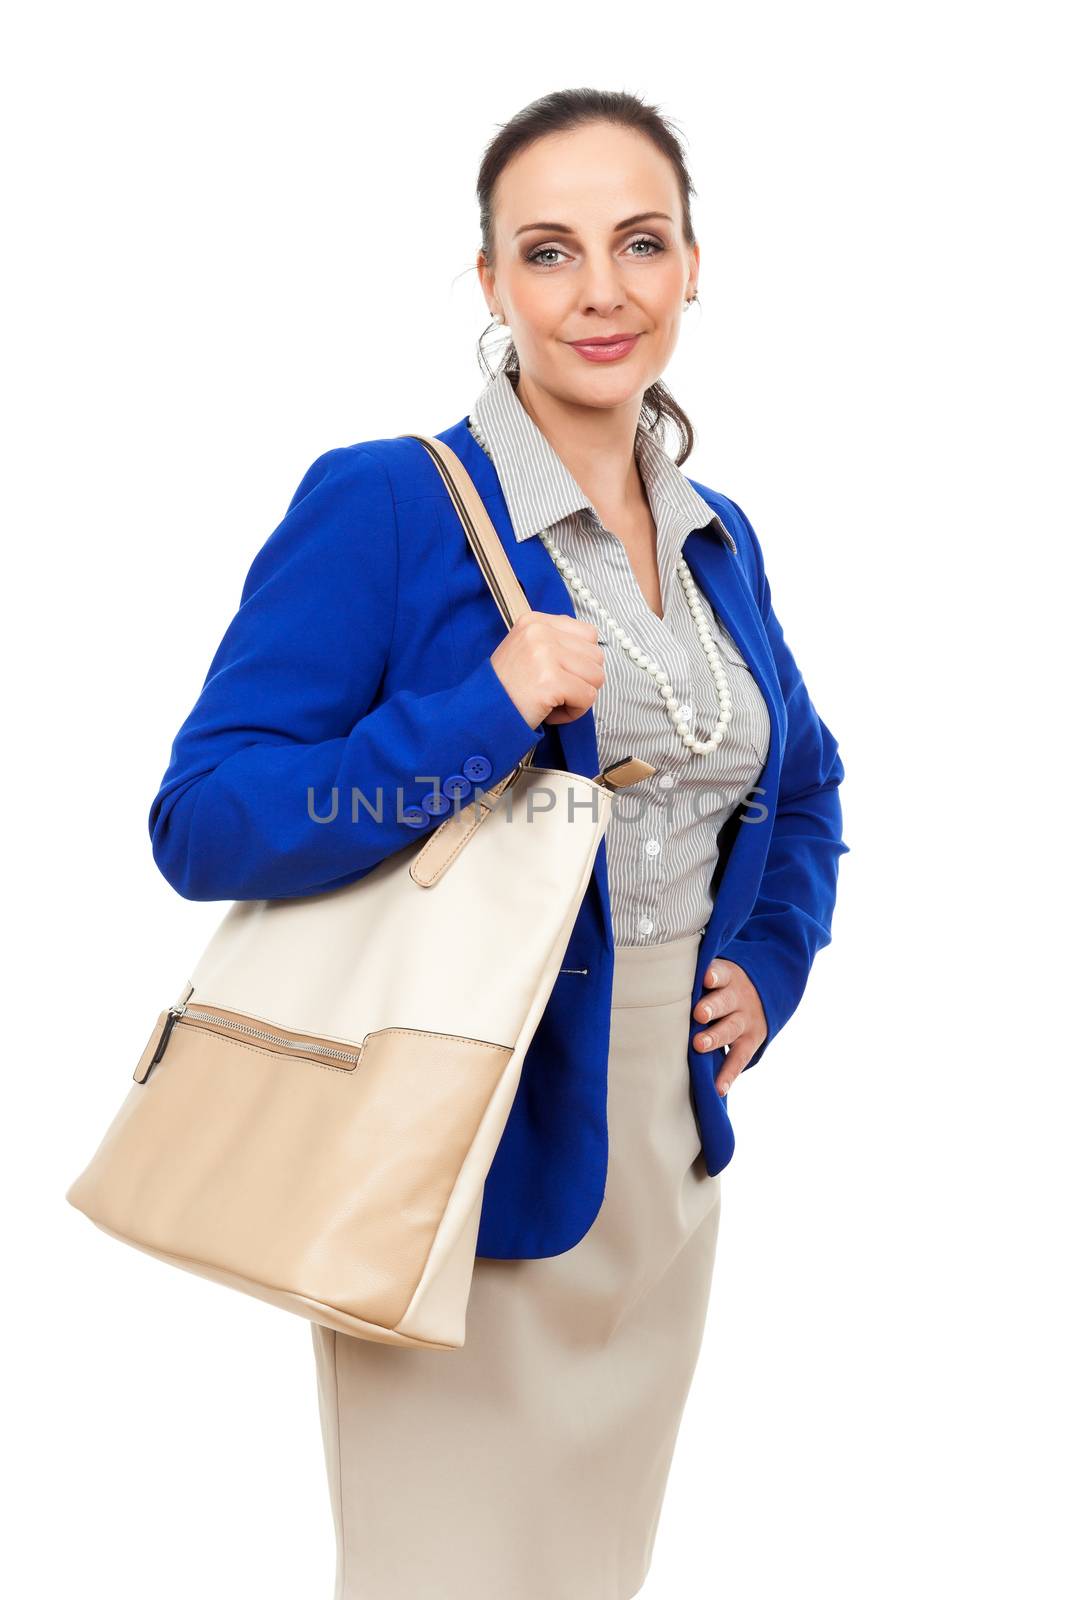 An image of a business woman with a beige handbag